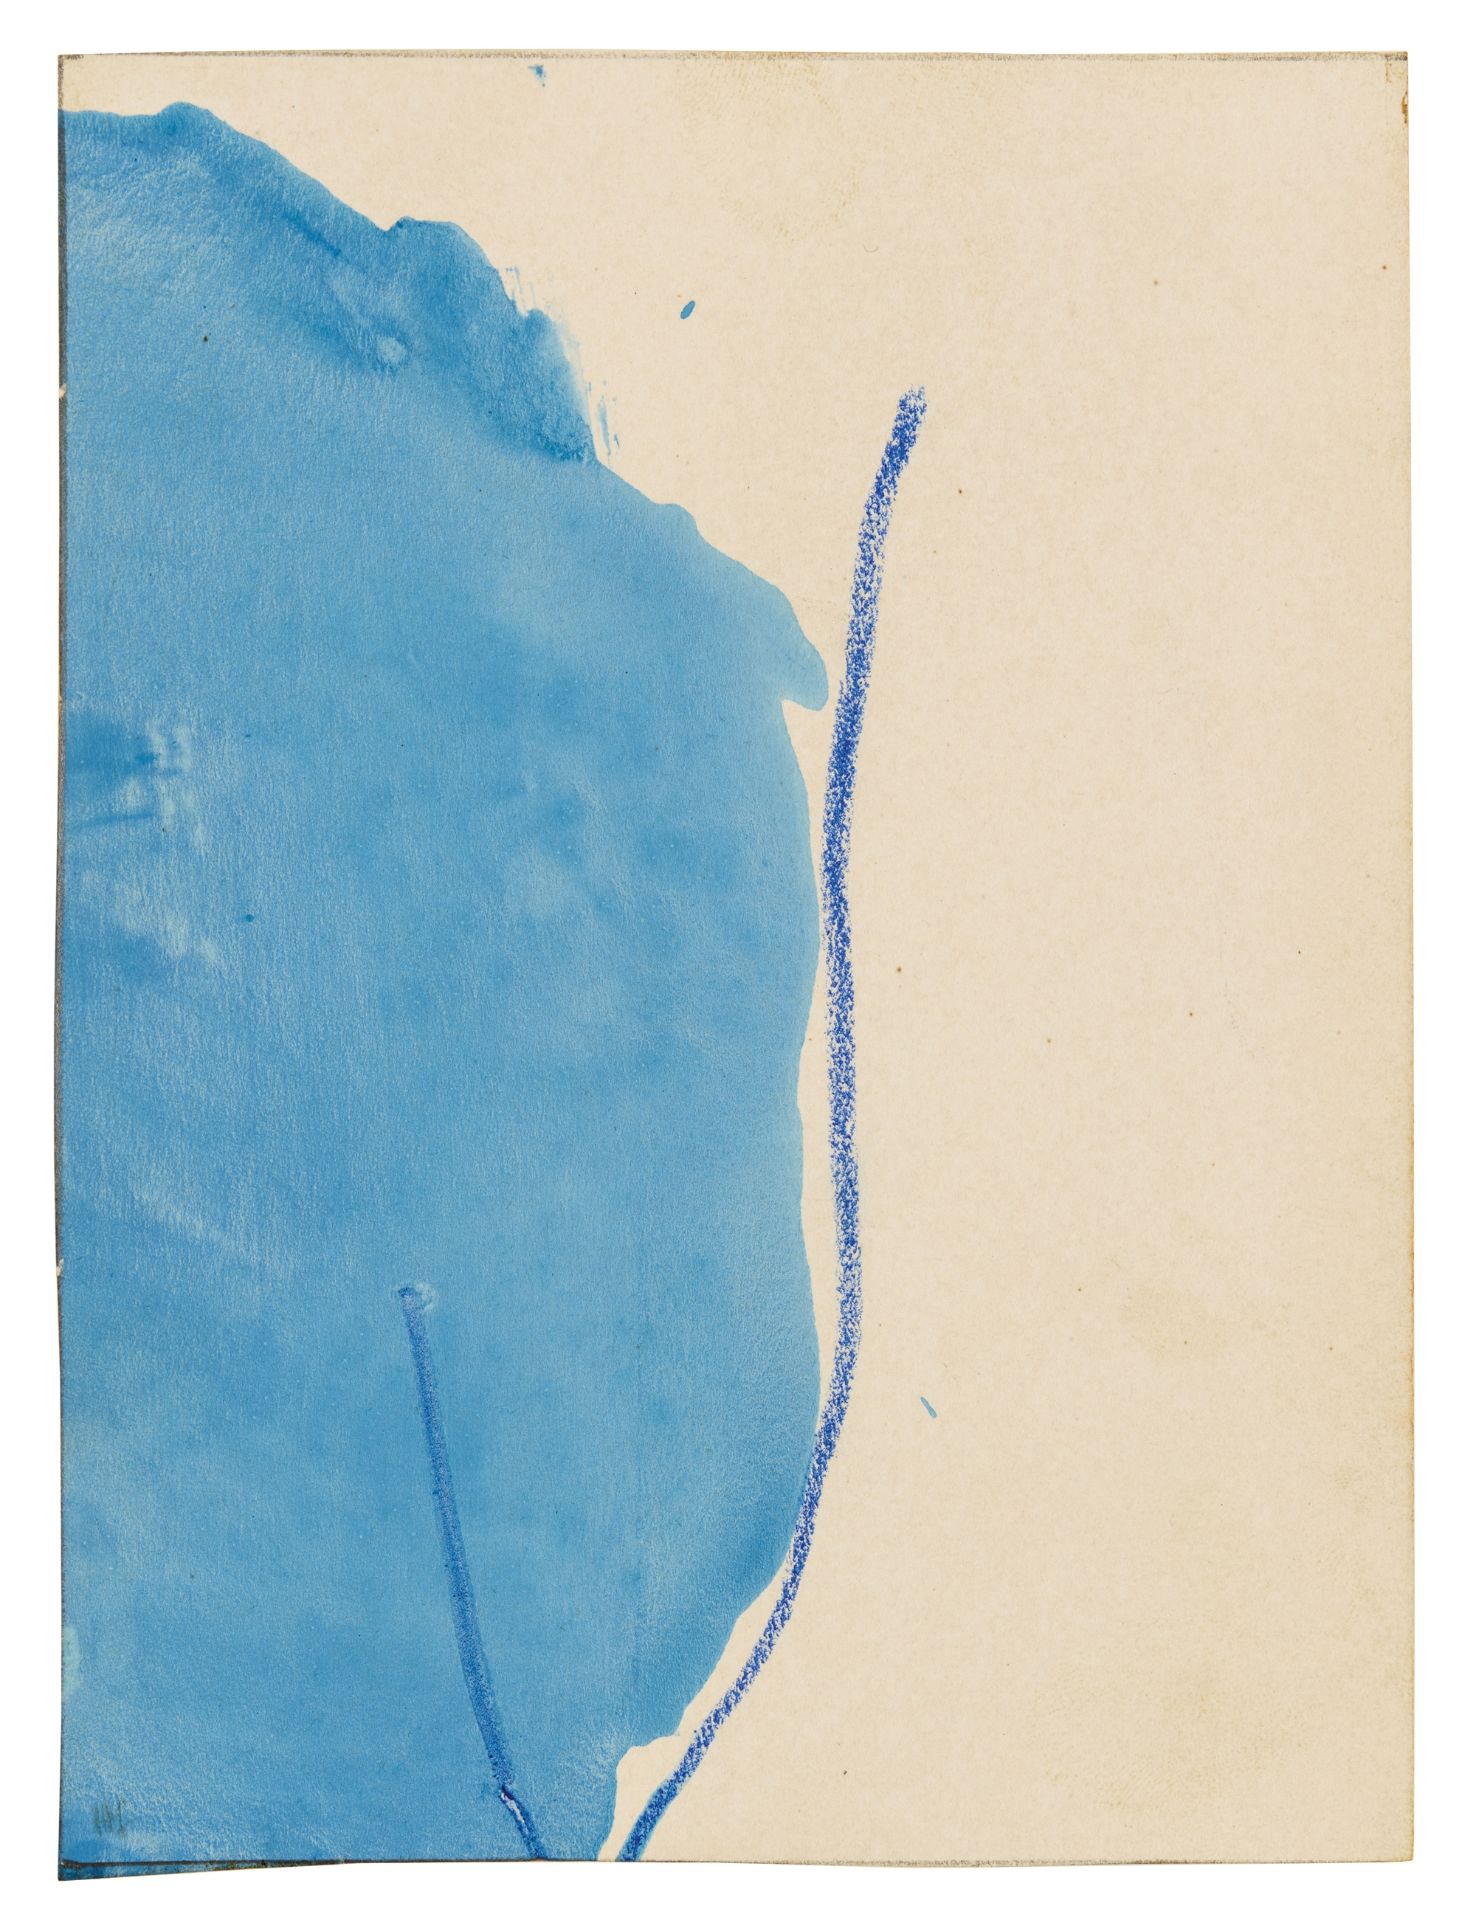 Helen Frankenthaler, Untitled (Original cover for "The Blue Stairs", a book of poetry by Barbara Gue